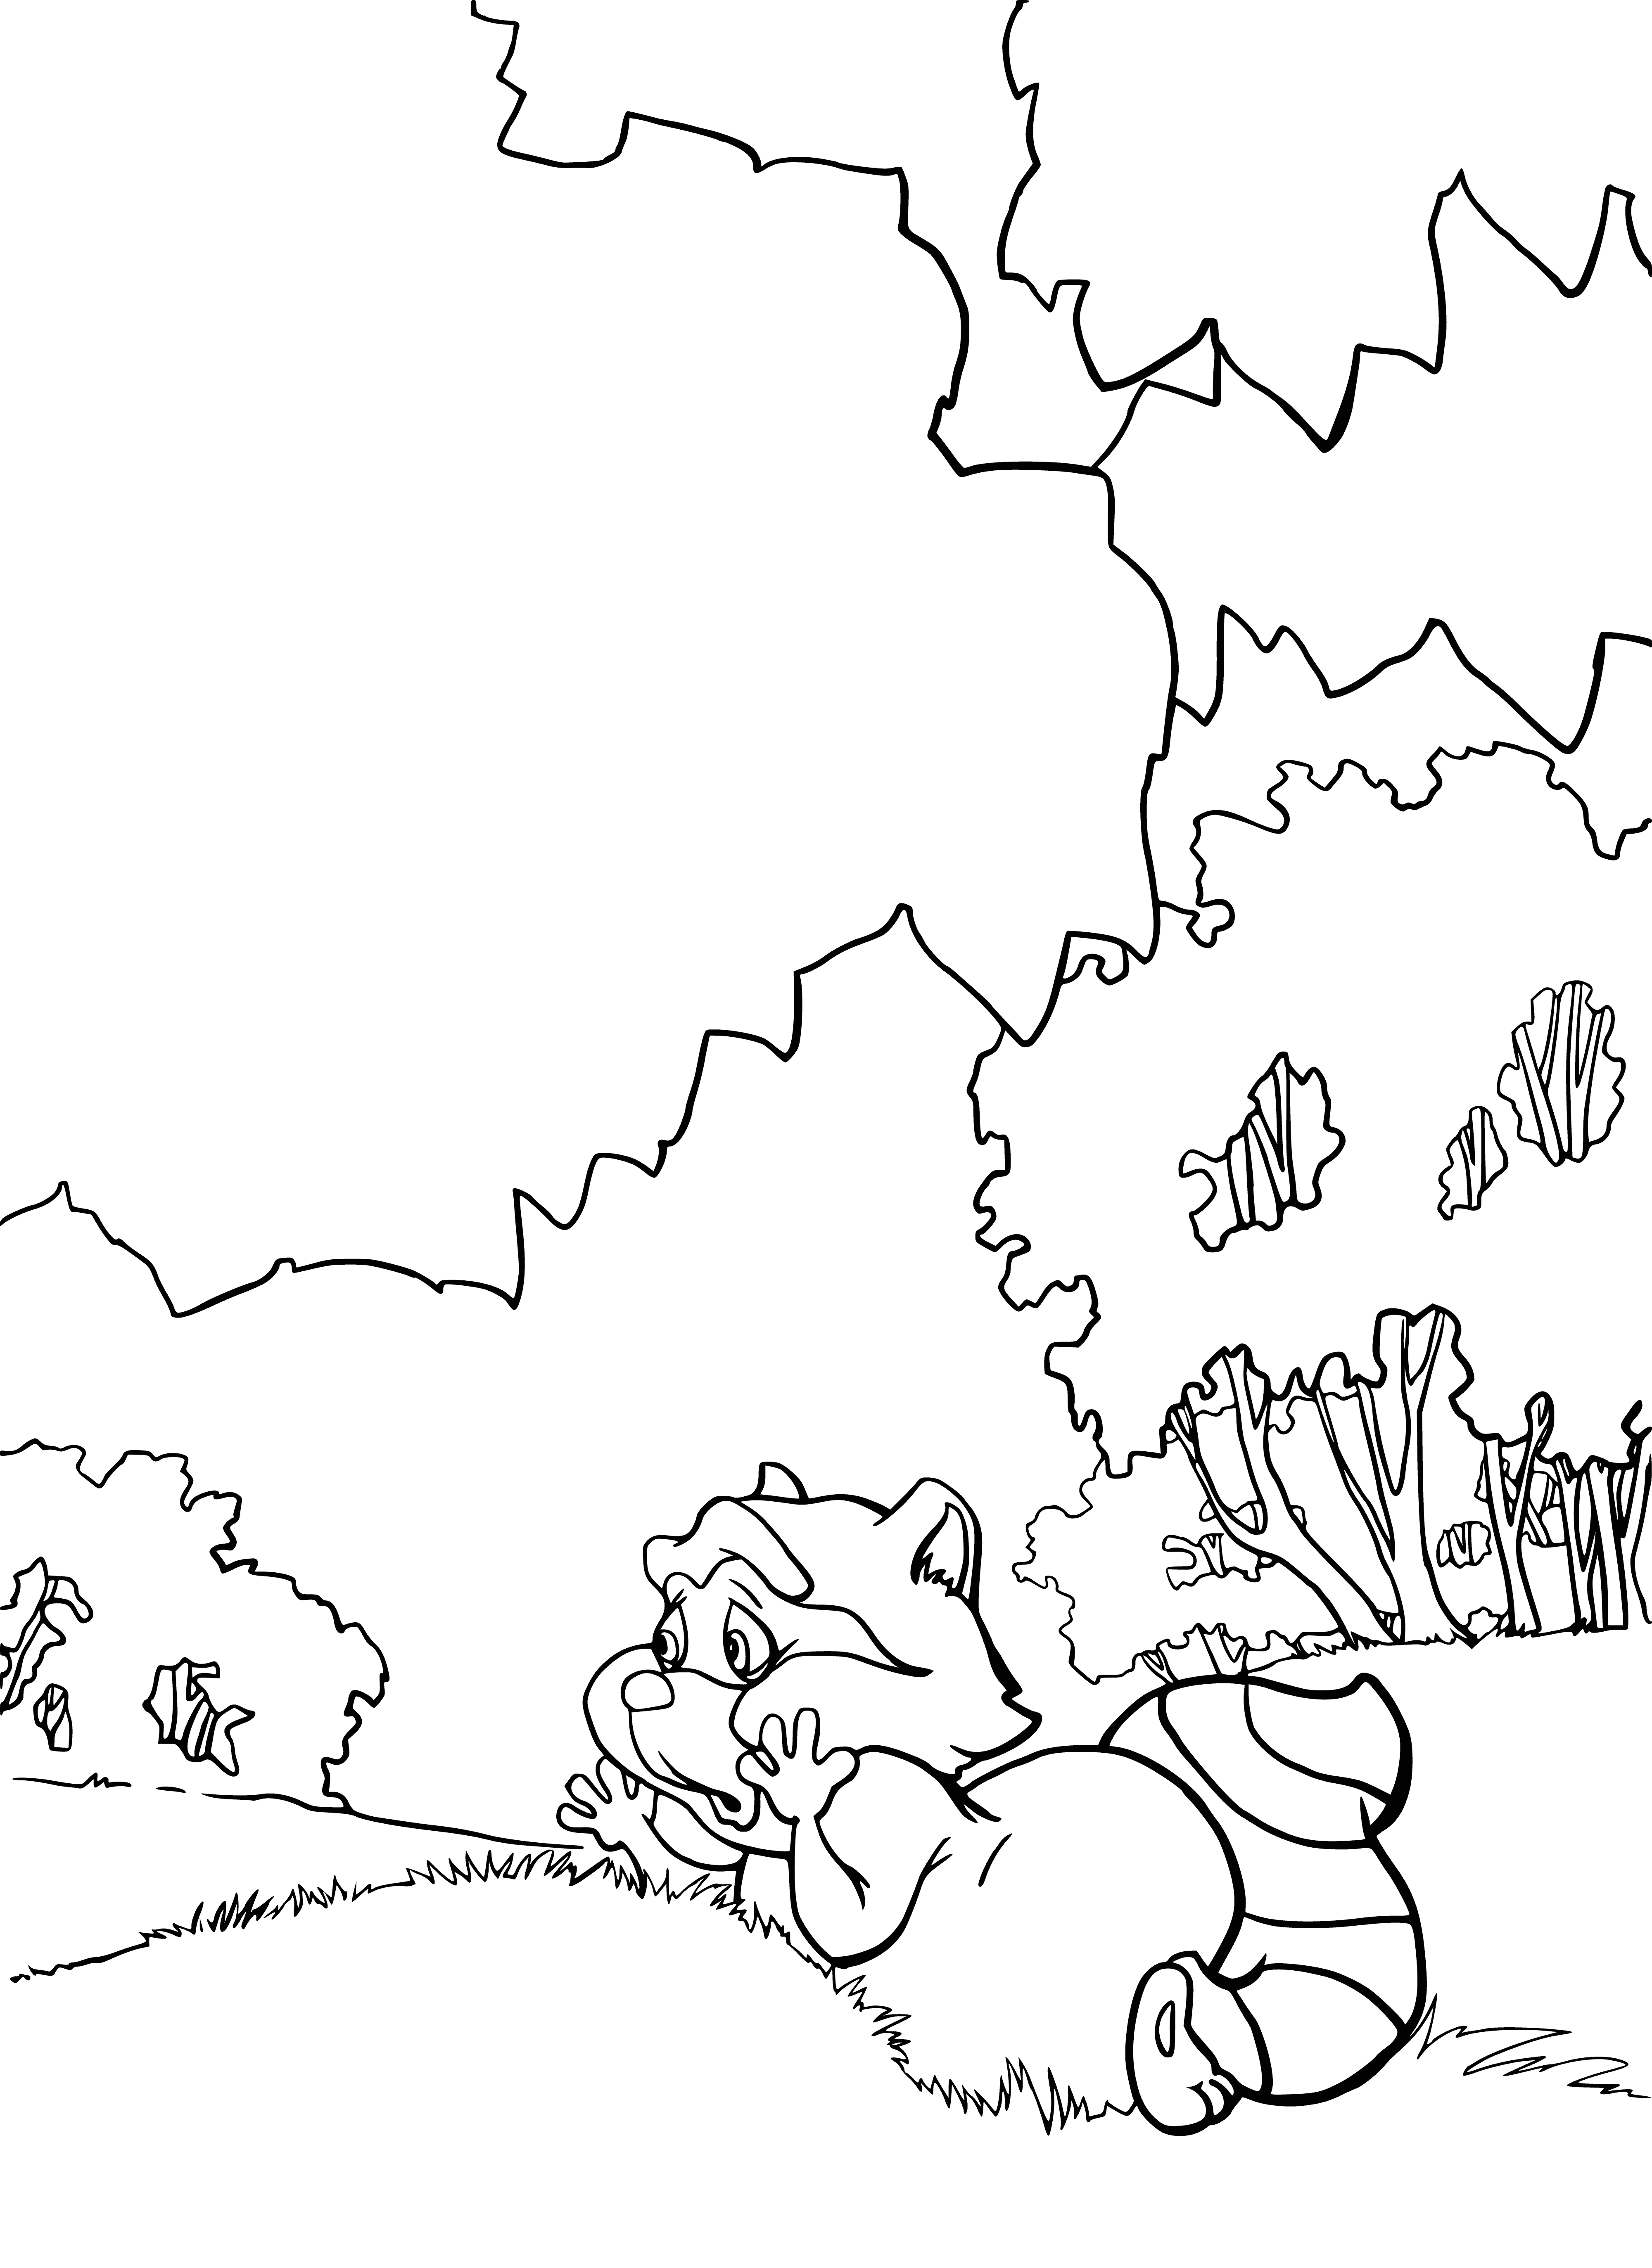 Buttercup coloring page